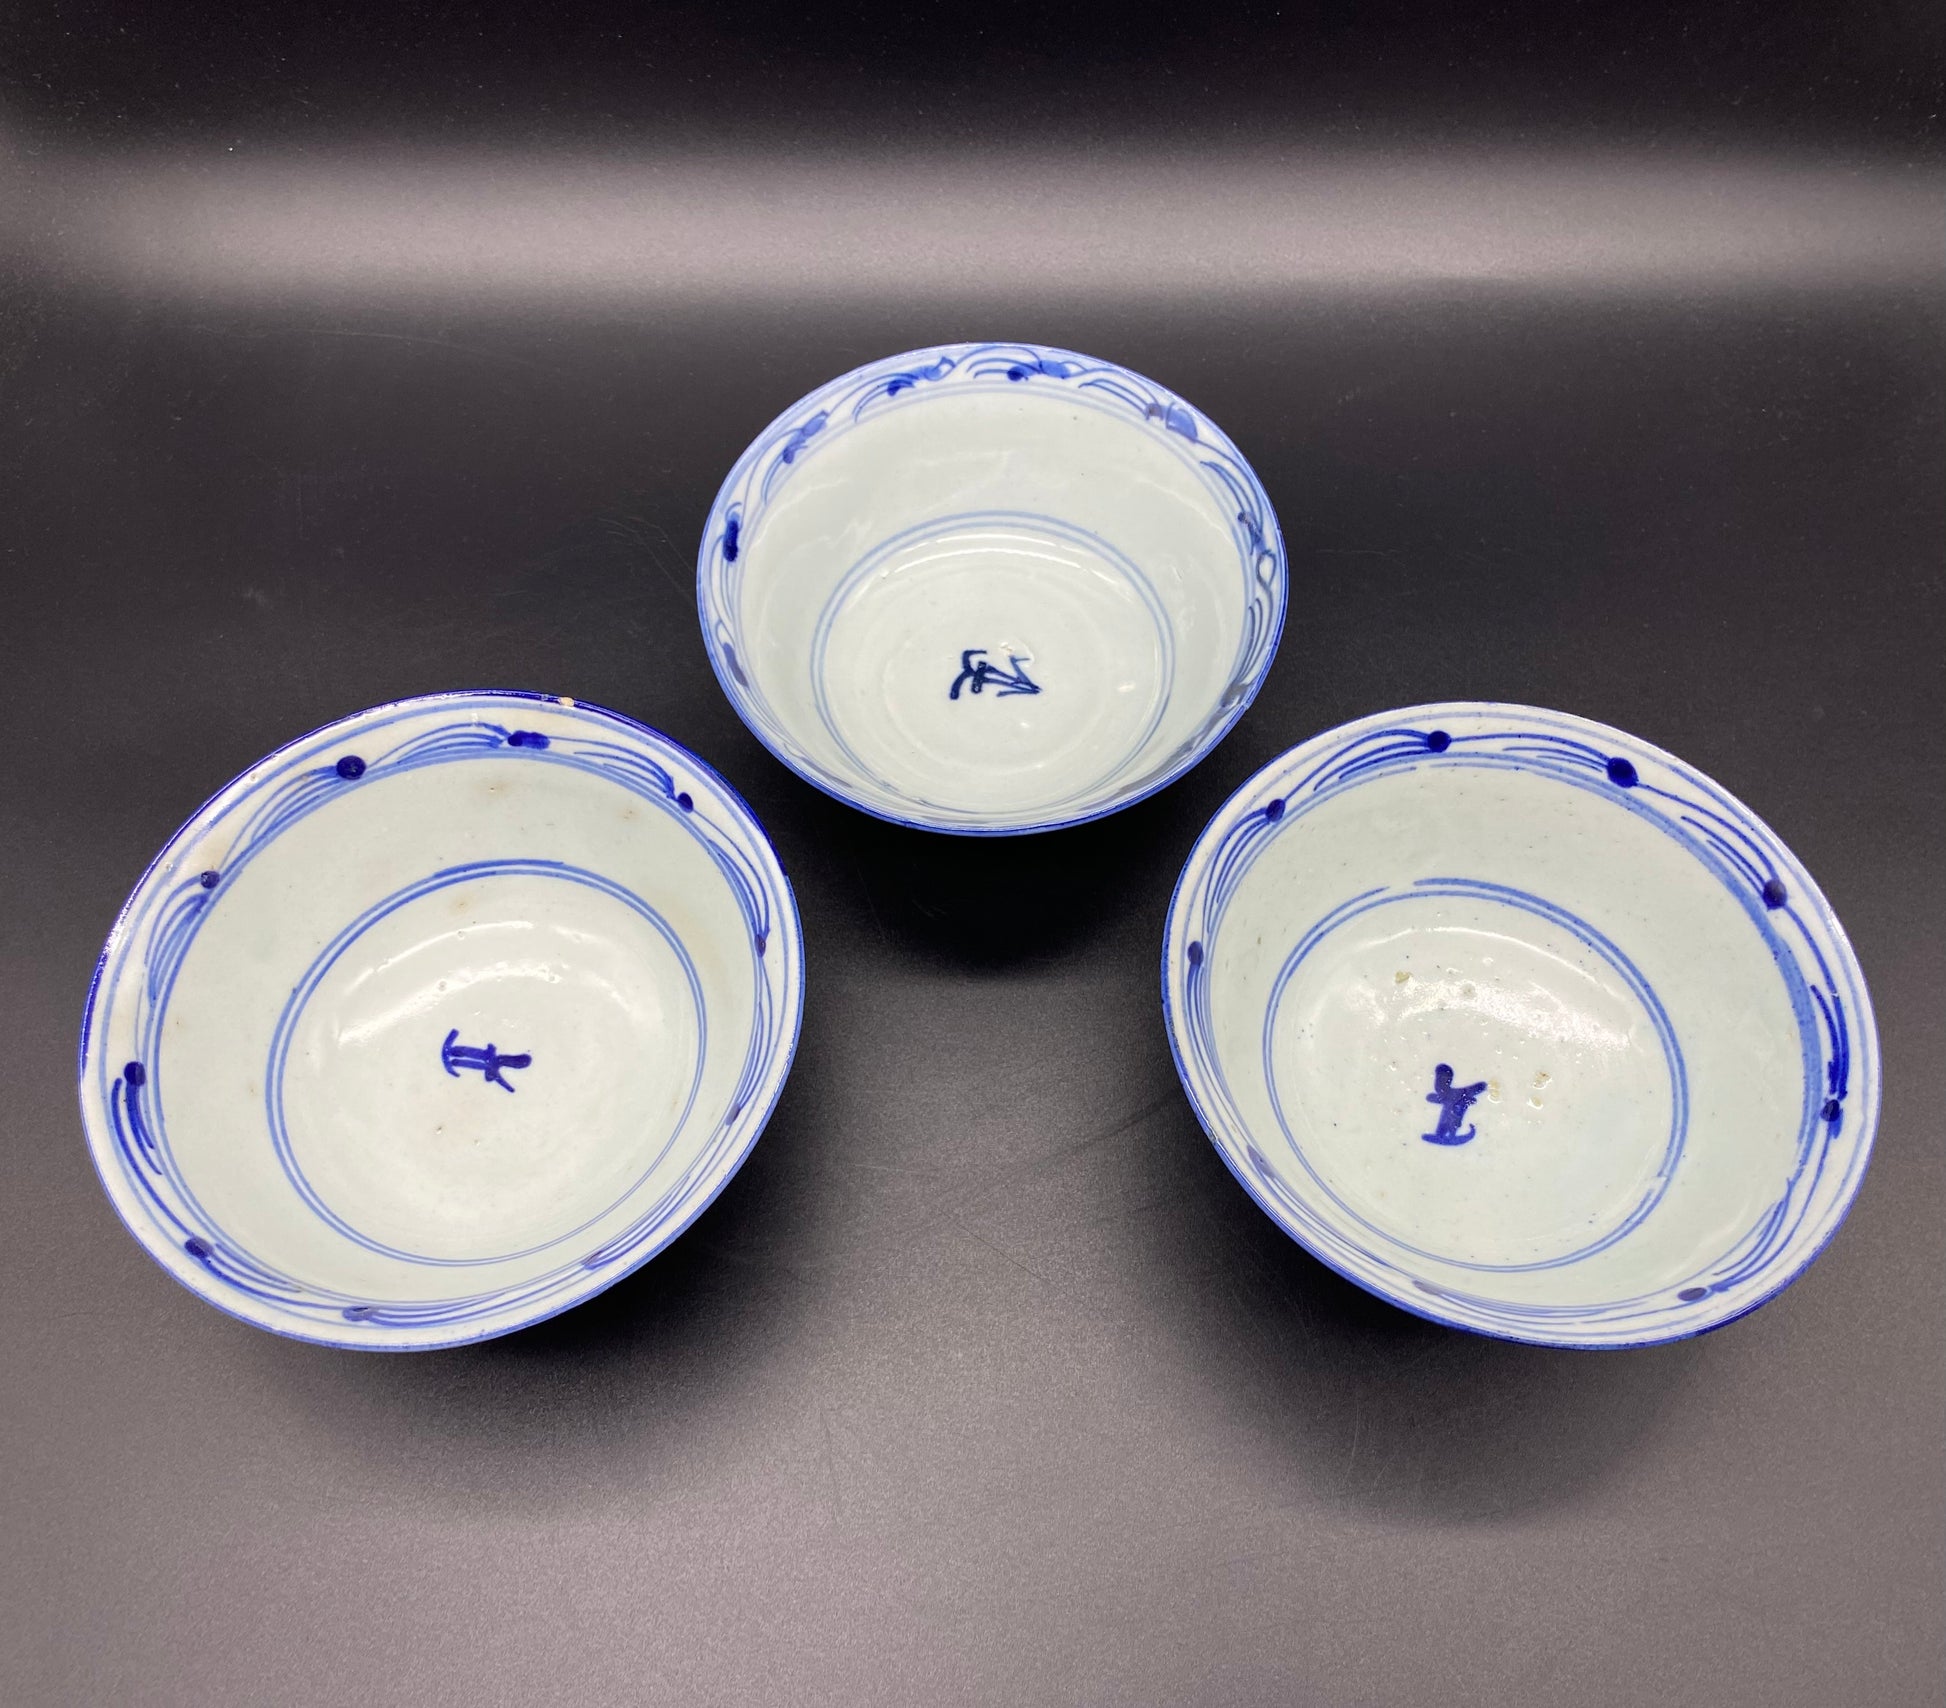 Christies Asian Art - Three Chinese Provencal Blue & White Qing Porcelain Bowls 18th Century 